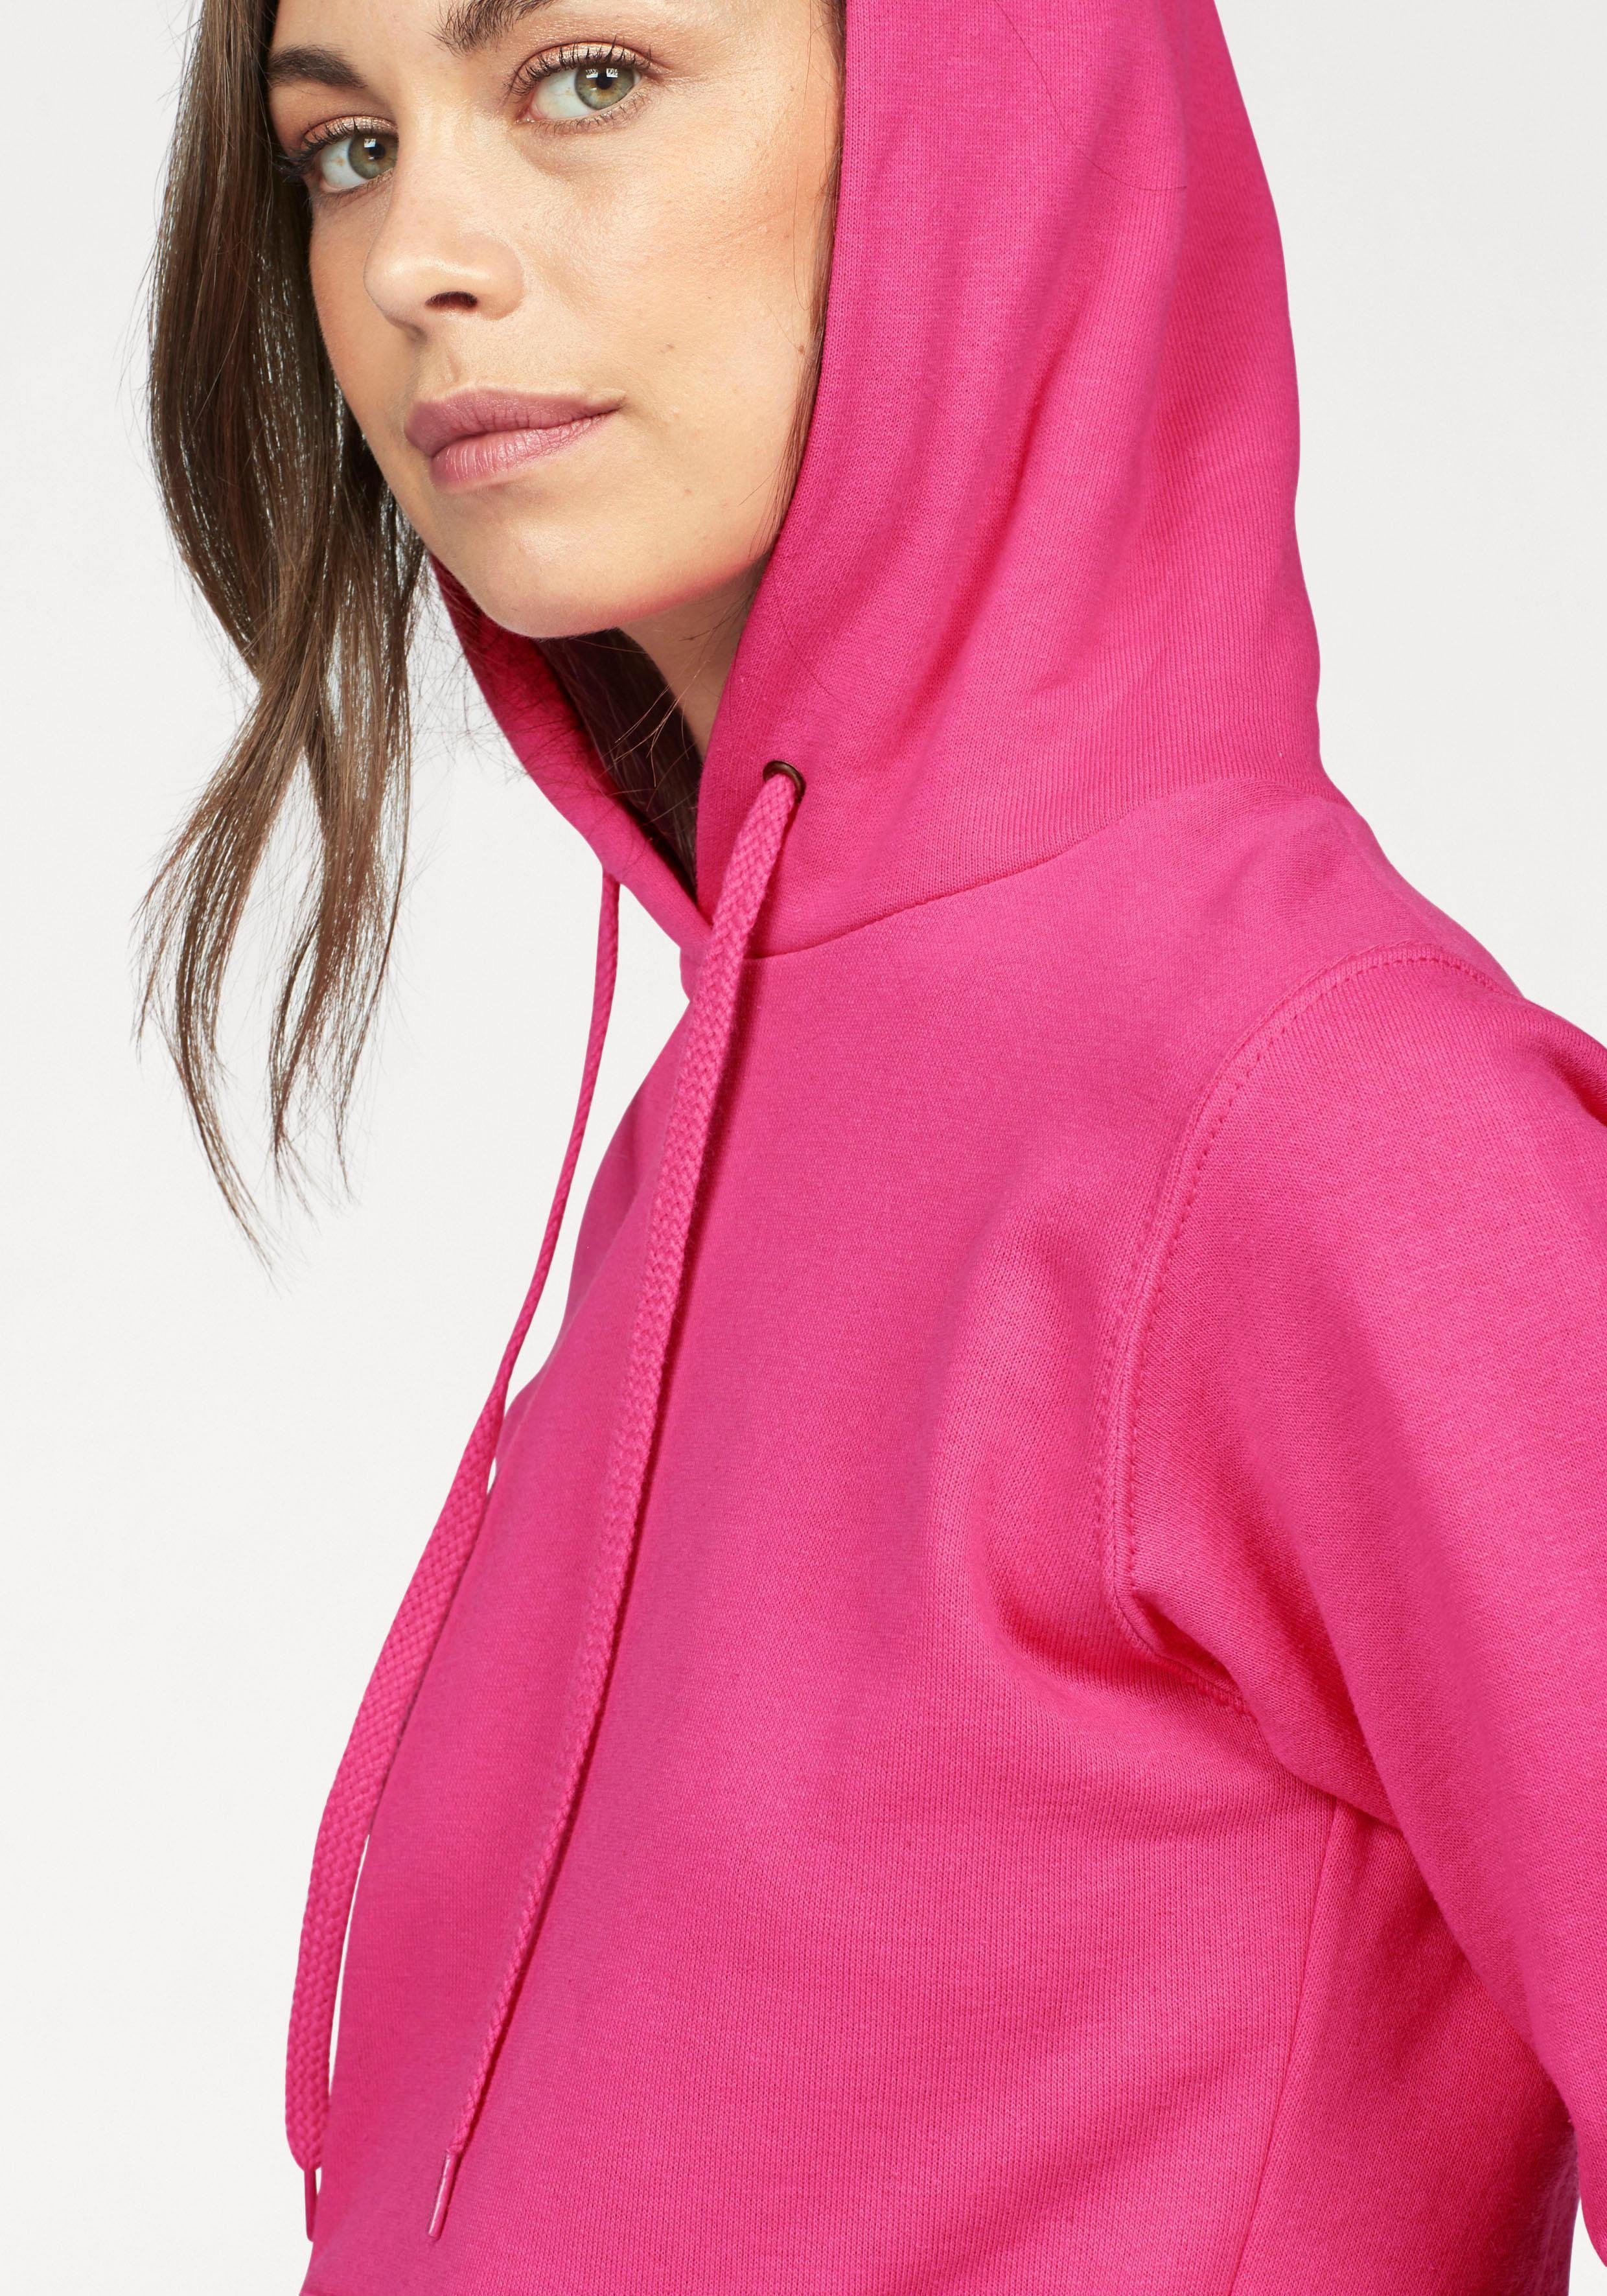 Fruit of the Loom Sweatshirt hooded pink Classic Sweat Lady-Fit